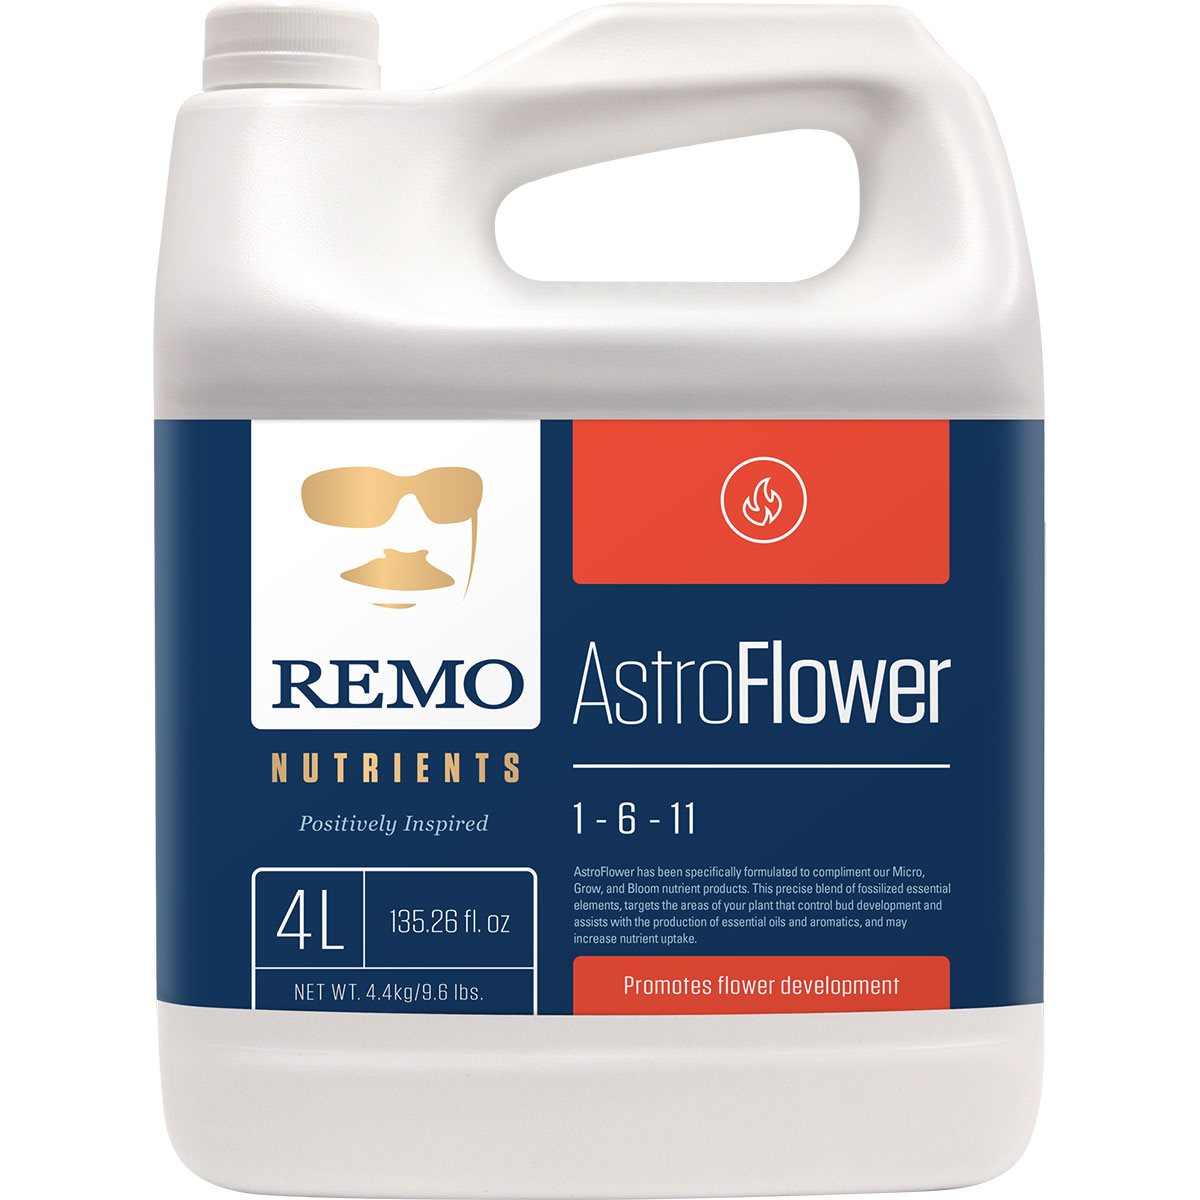 Product Secondary Image:Remo Nutrients Astro Flower (1-6-11)